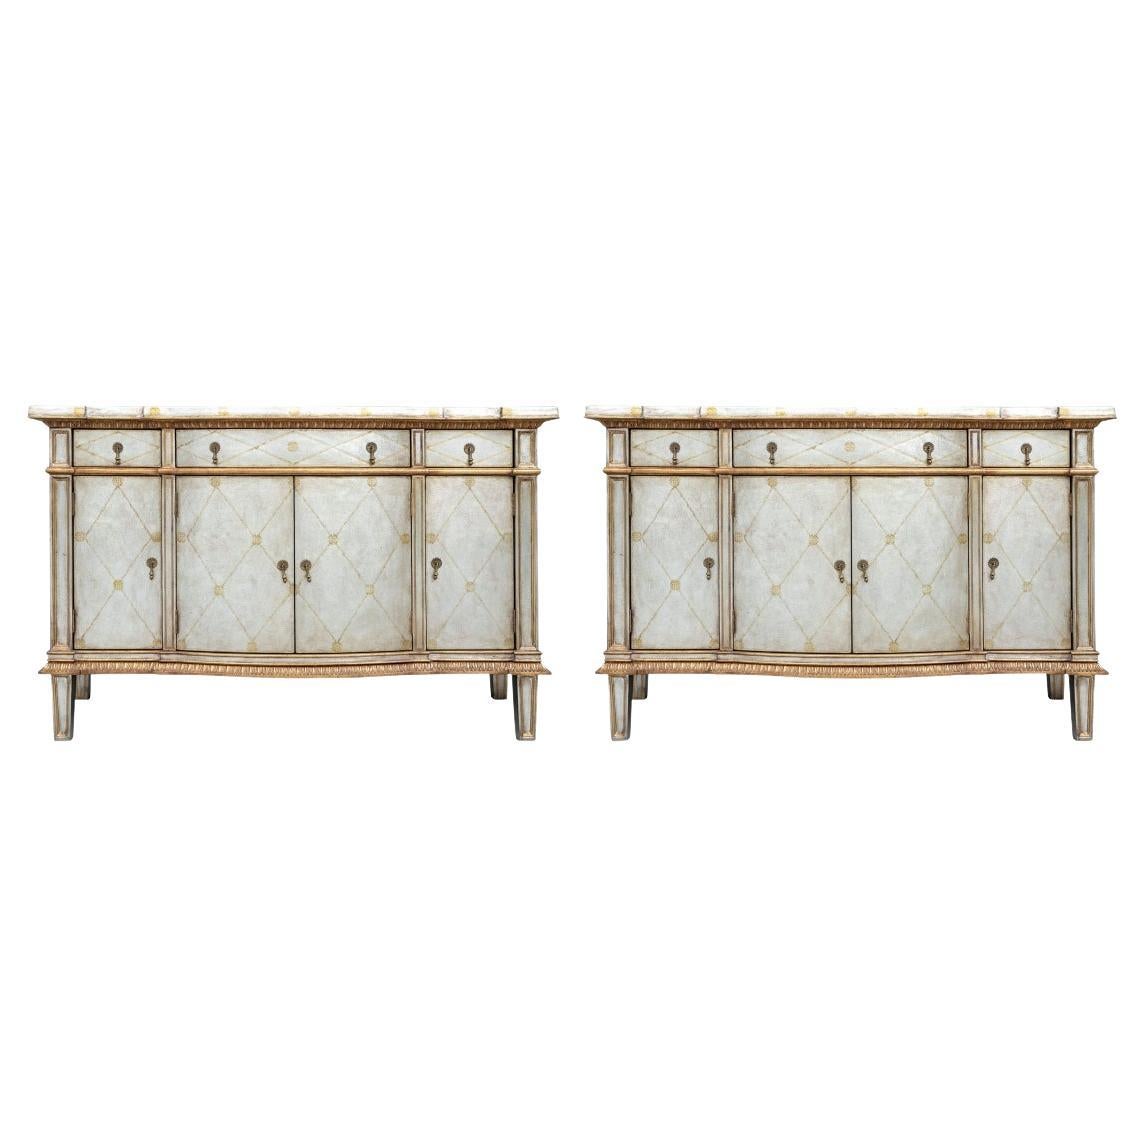 Extraordinary Pair of John-Richard Silvered Leather Credenzas For Sale